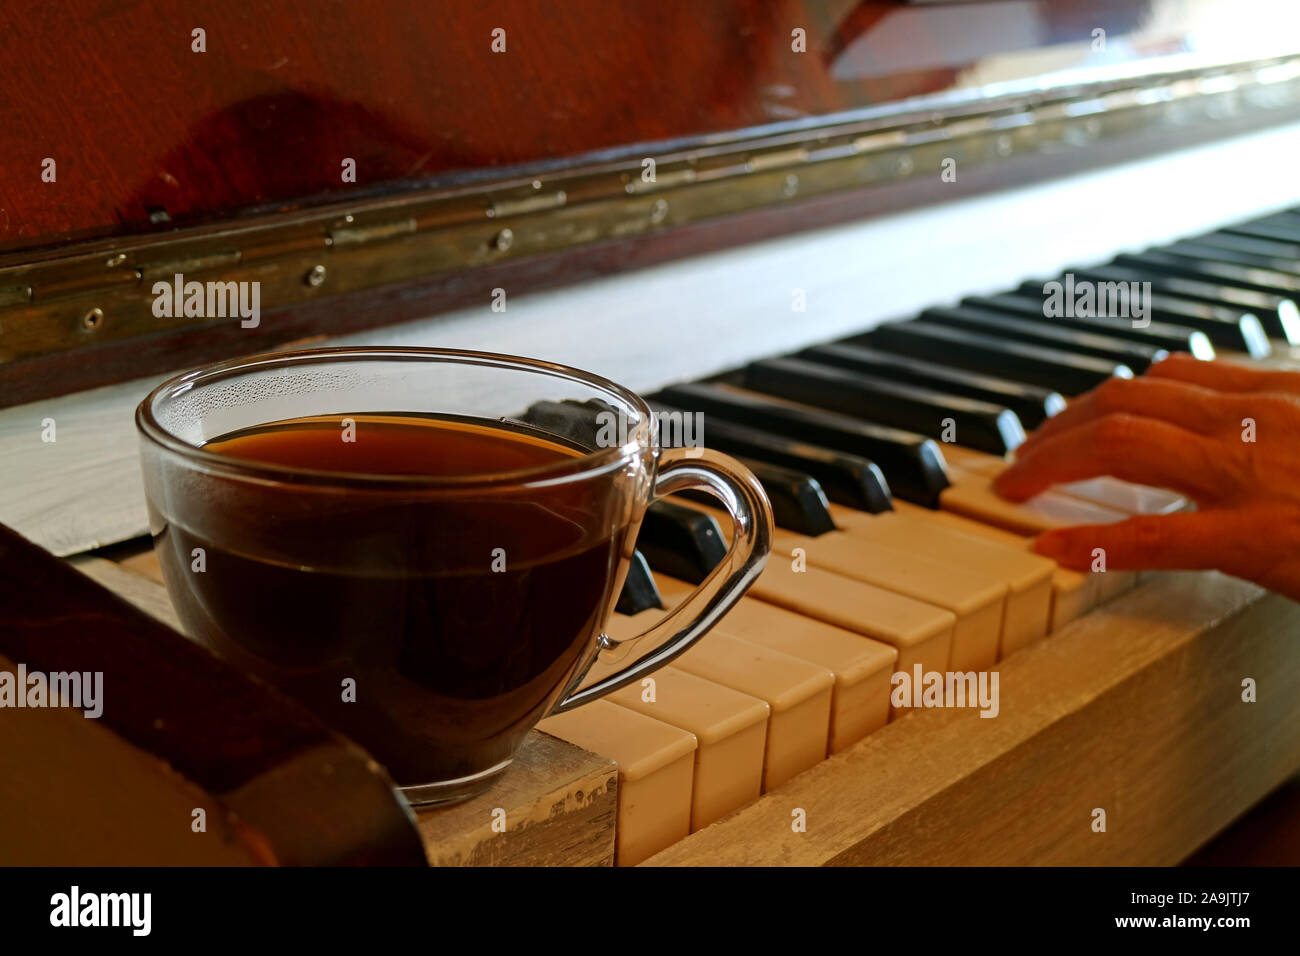 Cup of hot coffee on the piano with blurry pianist's hand in background Stock Photo